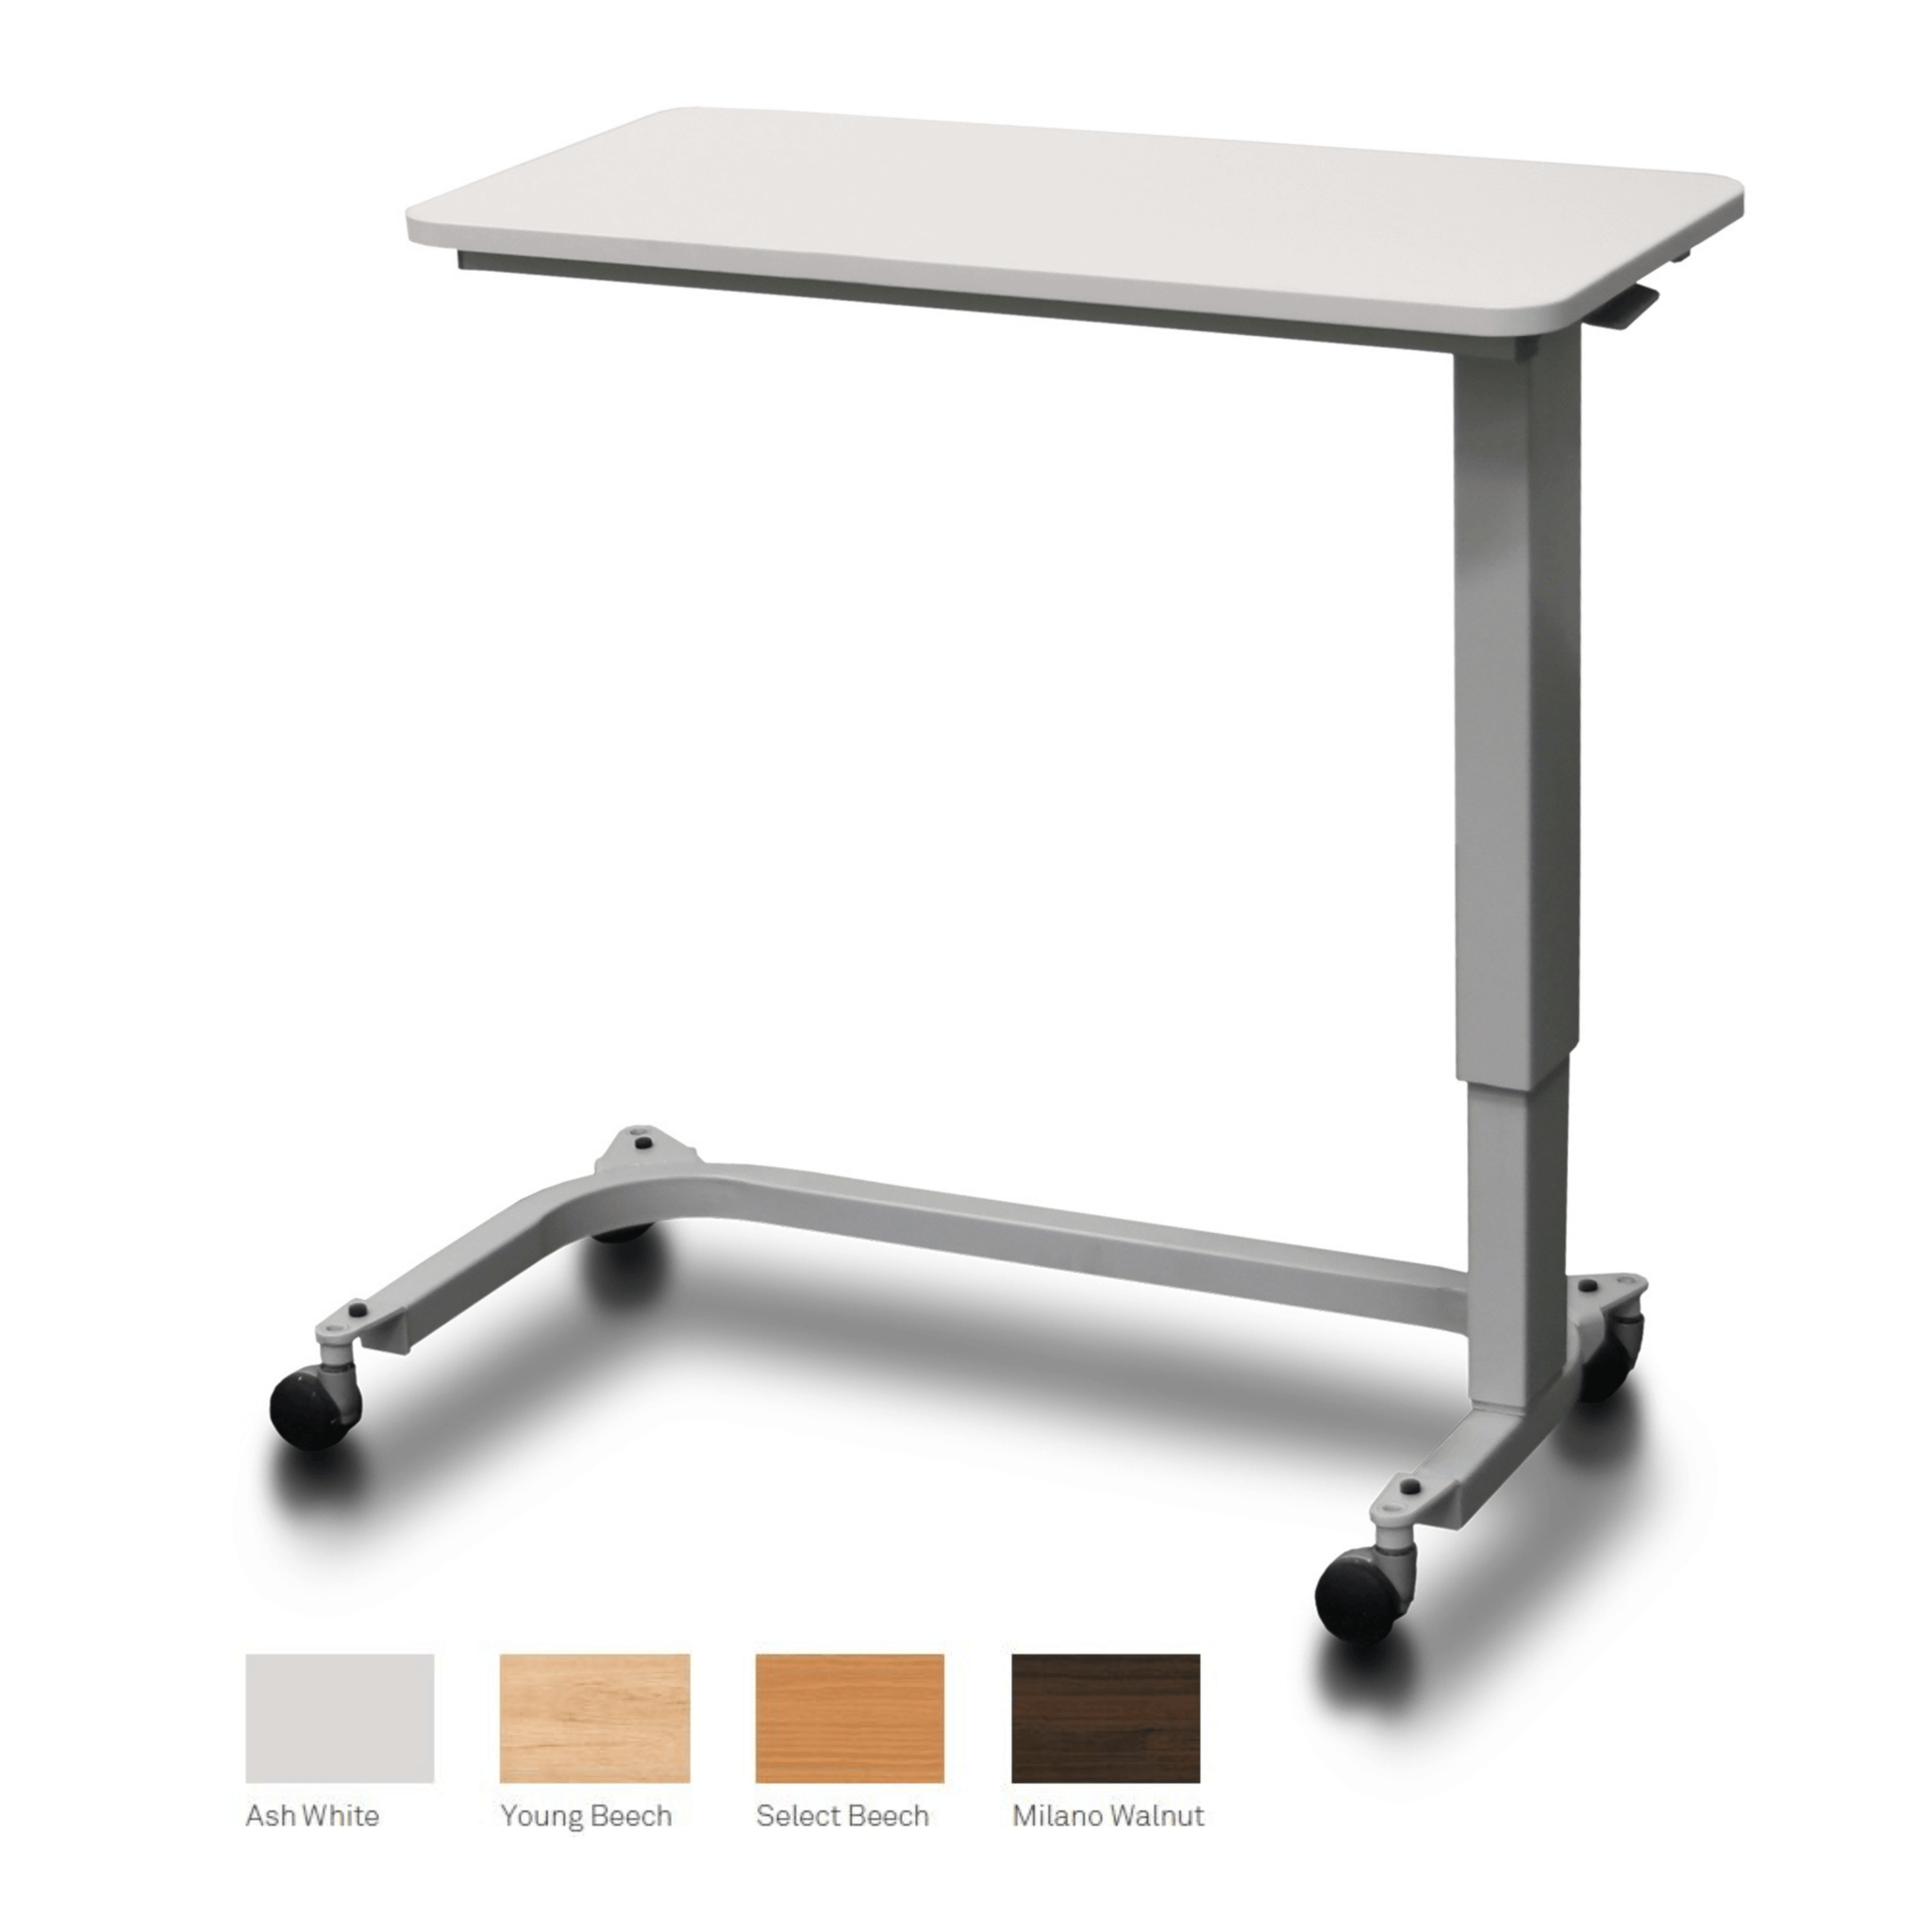 Fixed Top Overbed Table- Assisted Lift Height, Ash White